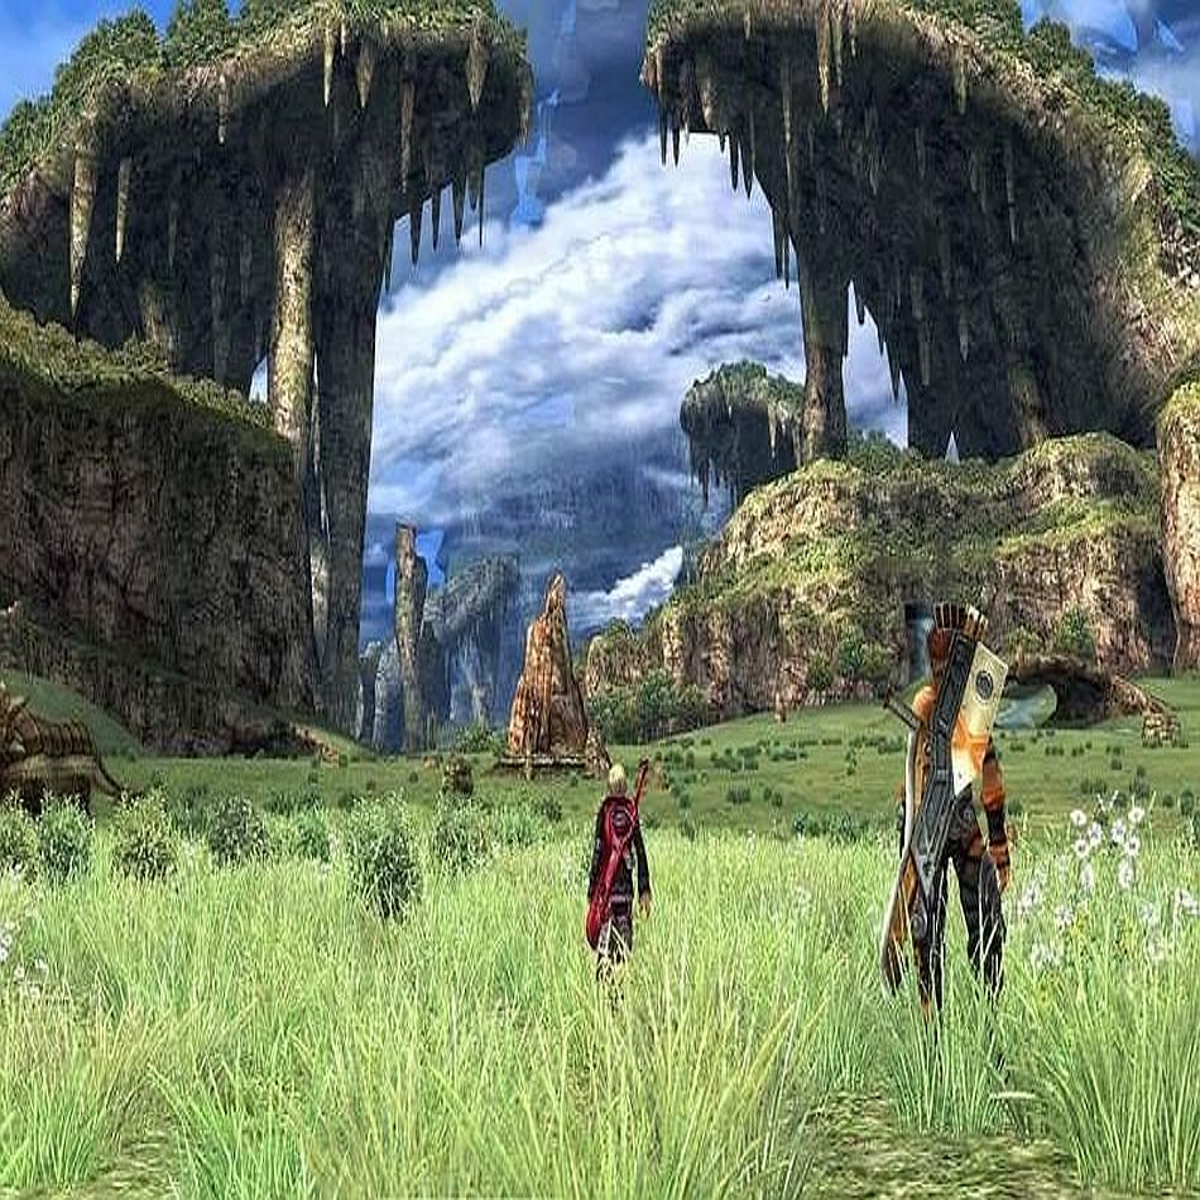 Xenoblade Chronicles 3: Everything we know so far